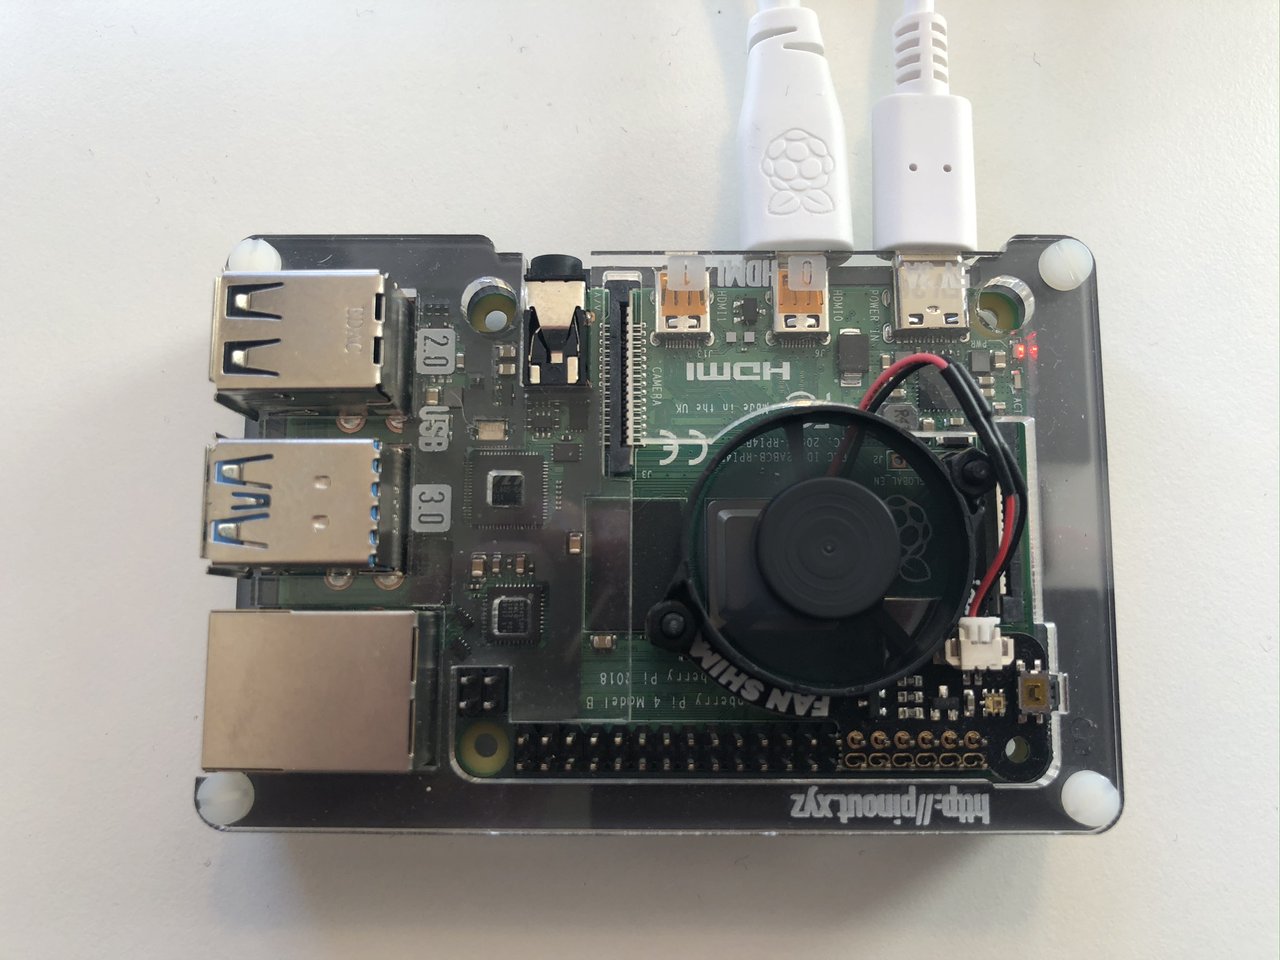 Photo of the Raspberry Pi 4B running the chat example in the first screenshot.